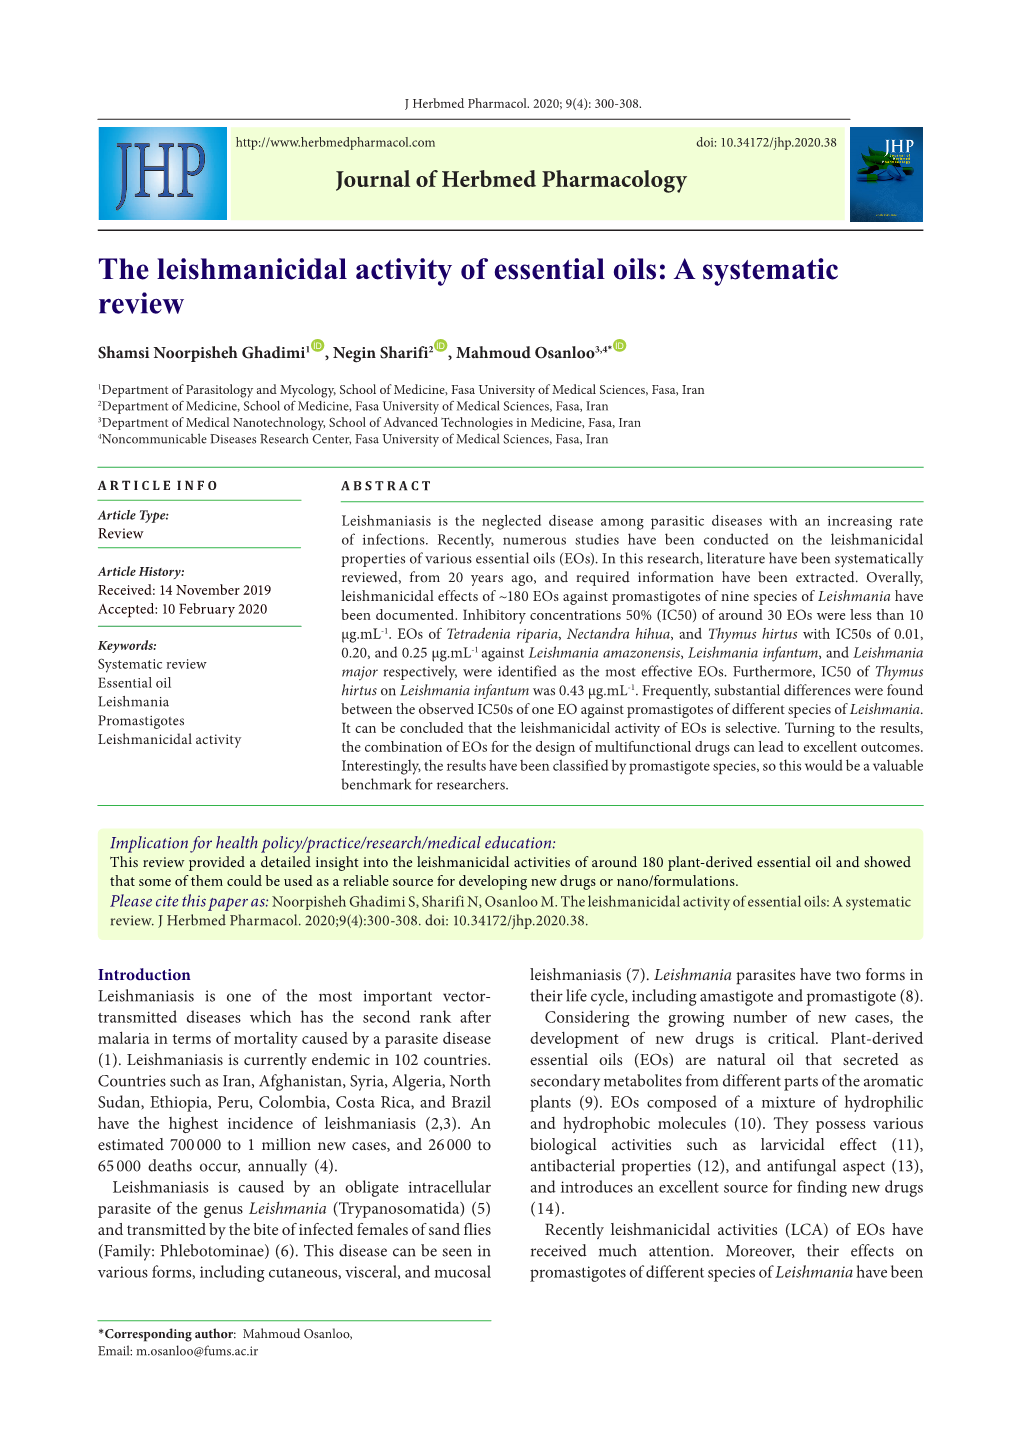 The Leishmanicidal Activity of Essential Oils: a Systematic Review